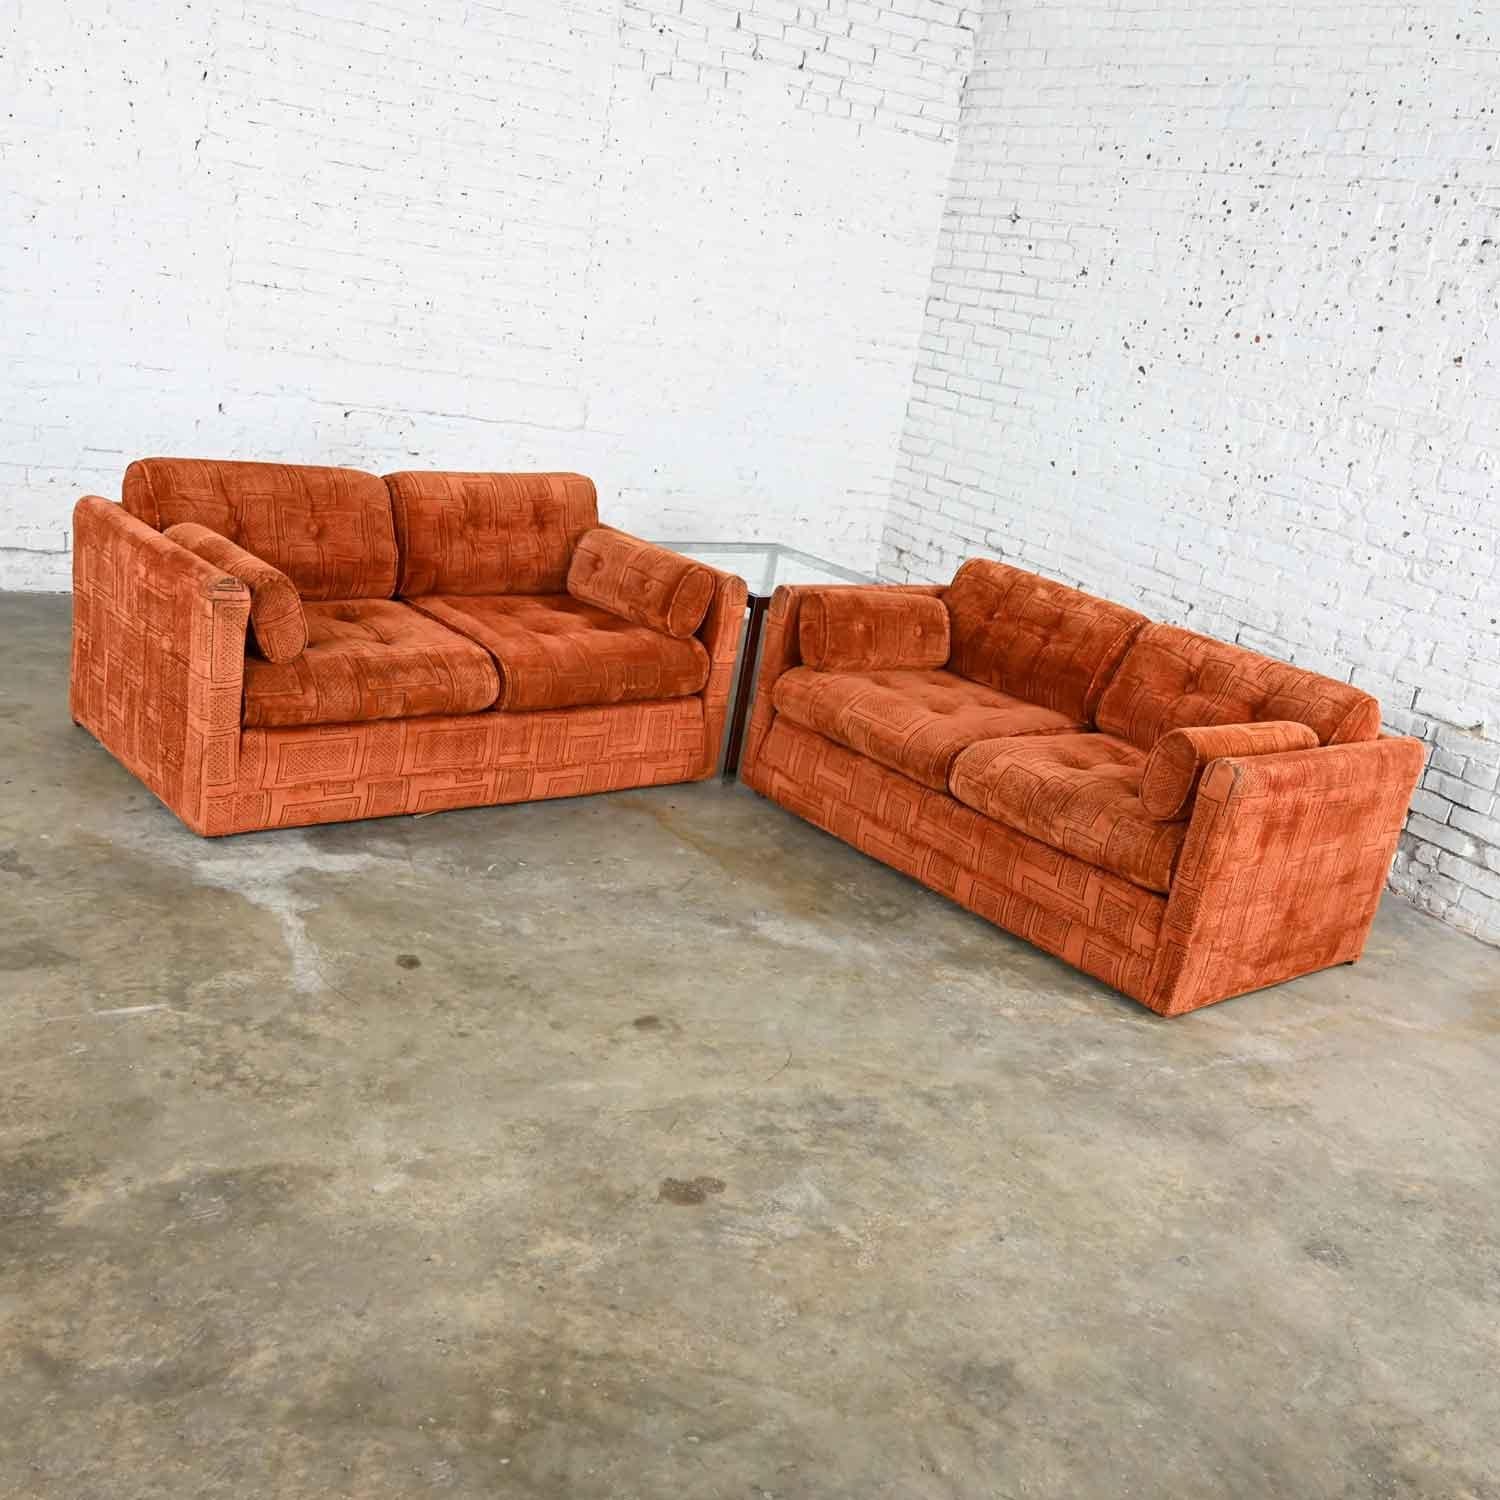 20th Century Vintage Modern Tuxedo Style Love Seats Rust Fabric by Pem-Kay Furniture a Pair